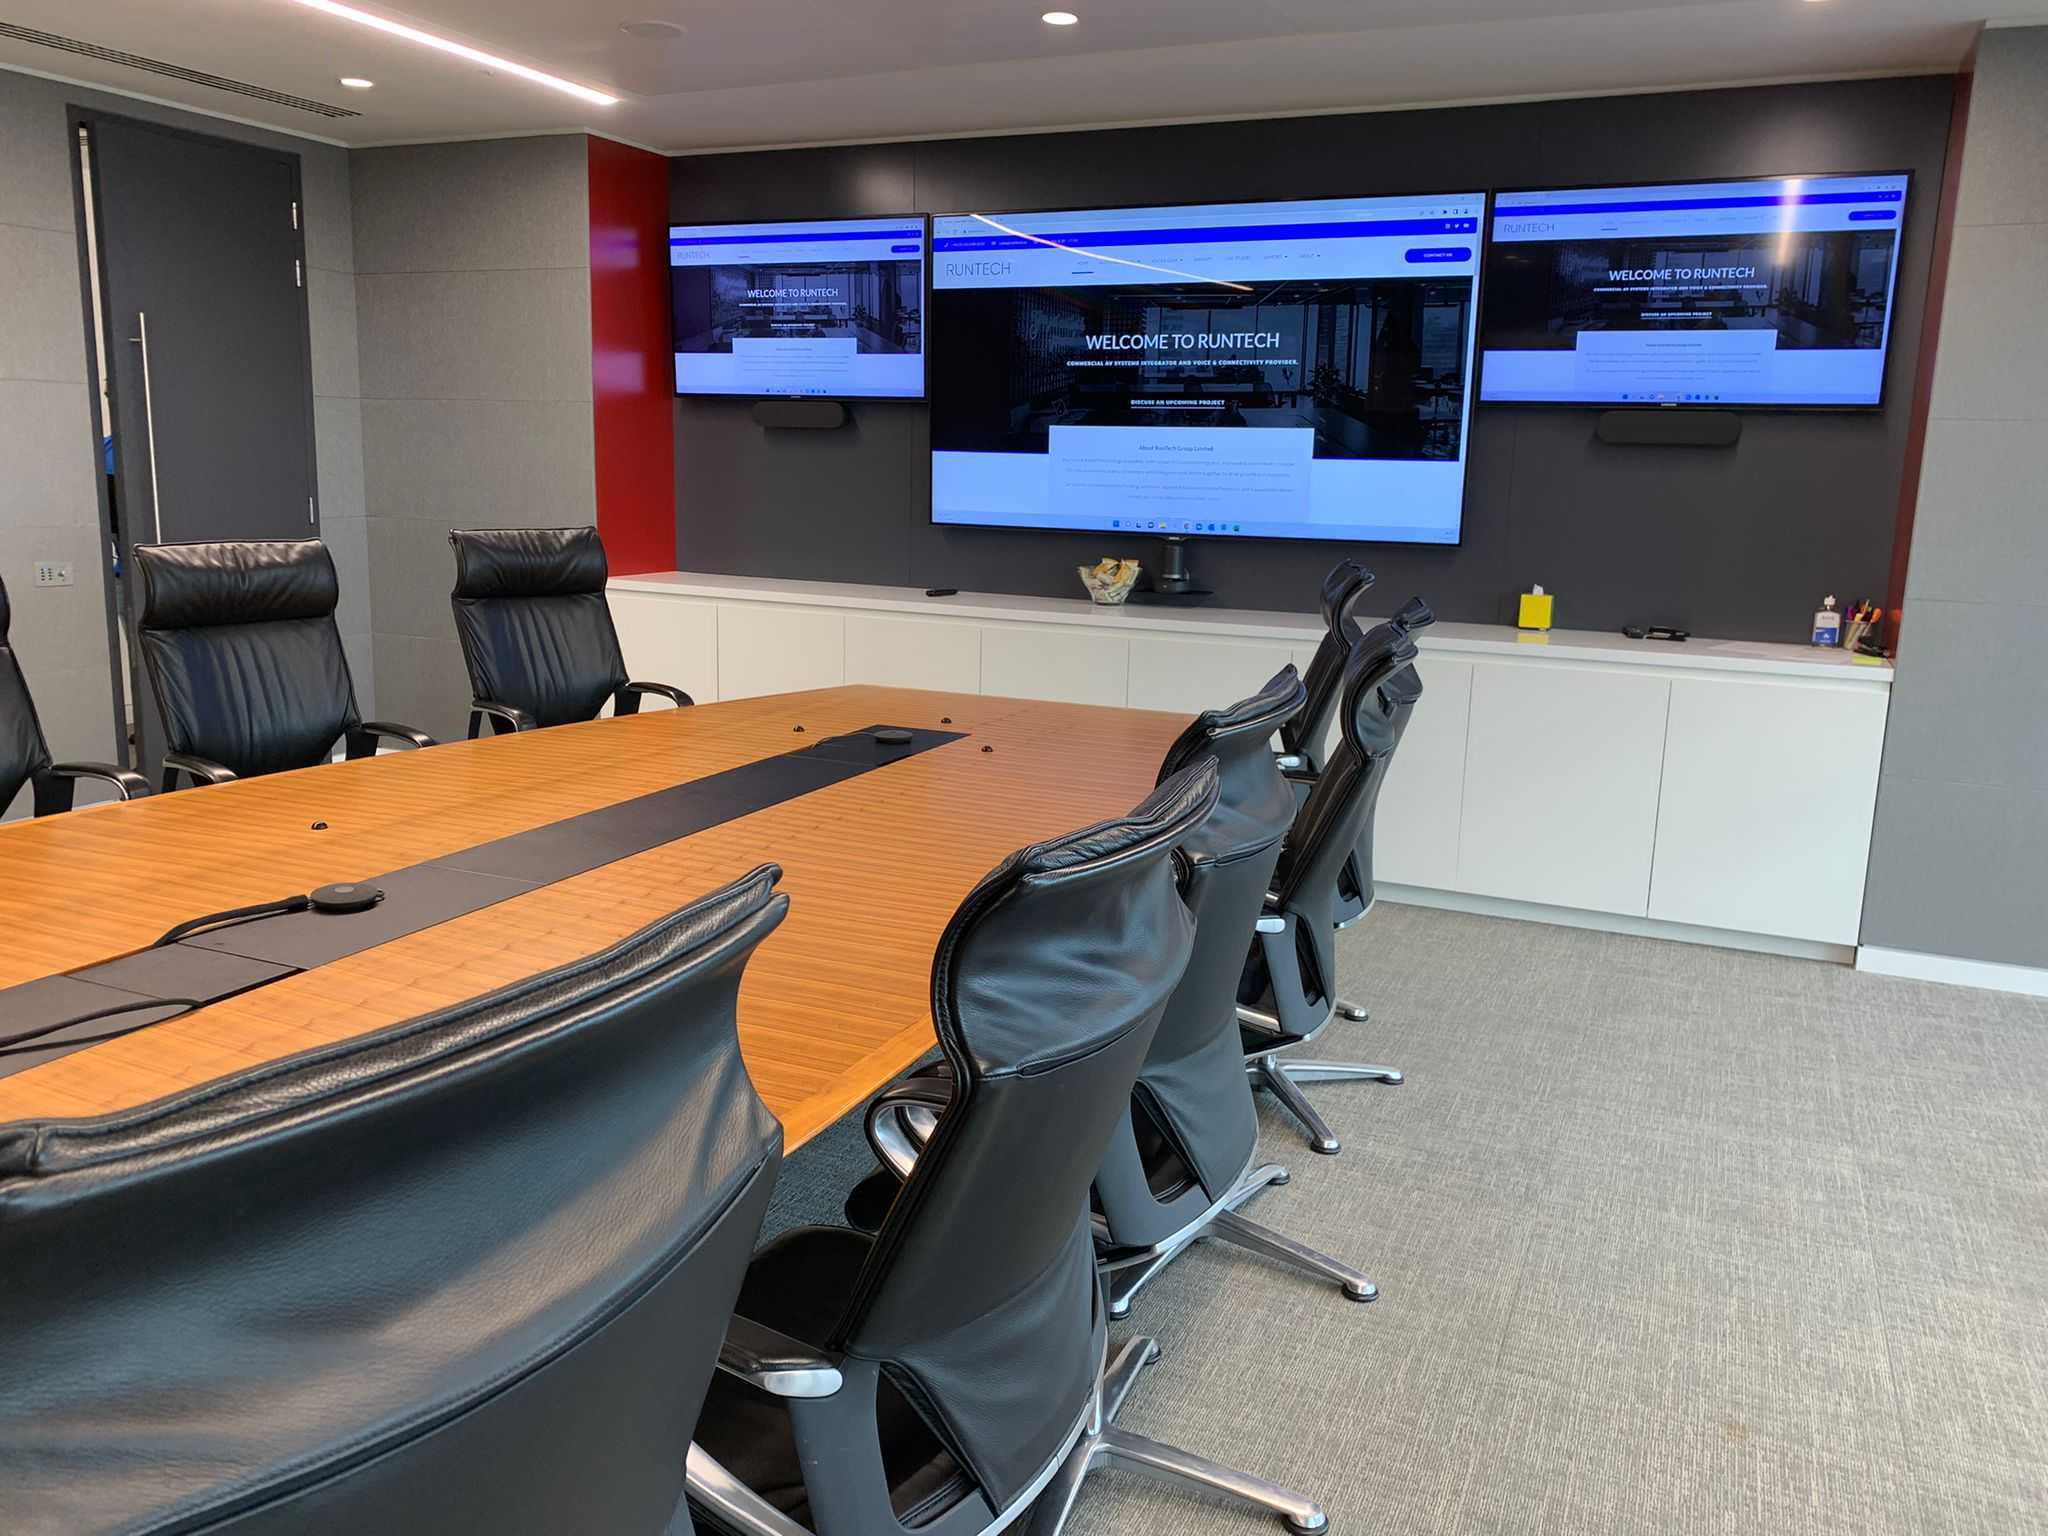 Full audio visual office upgrade for a global insurance provider